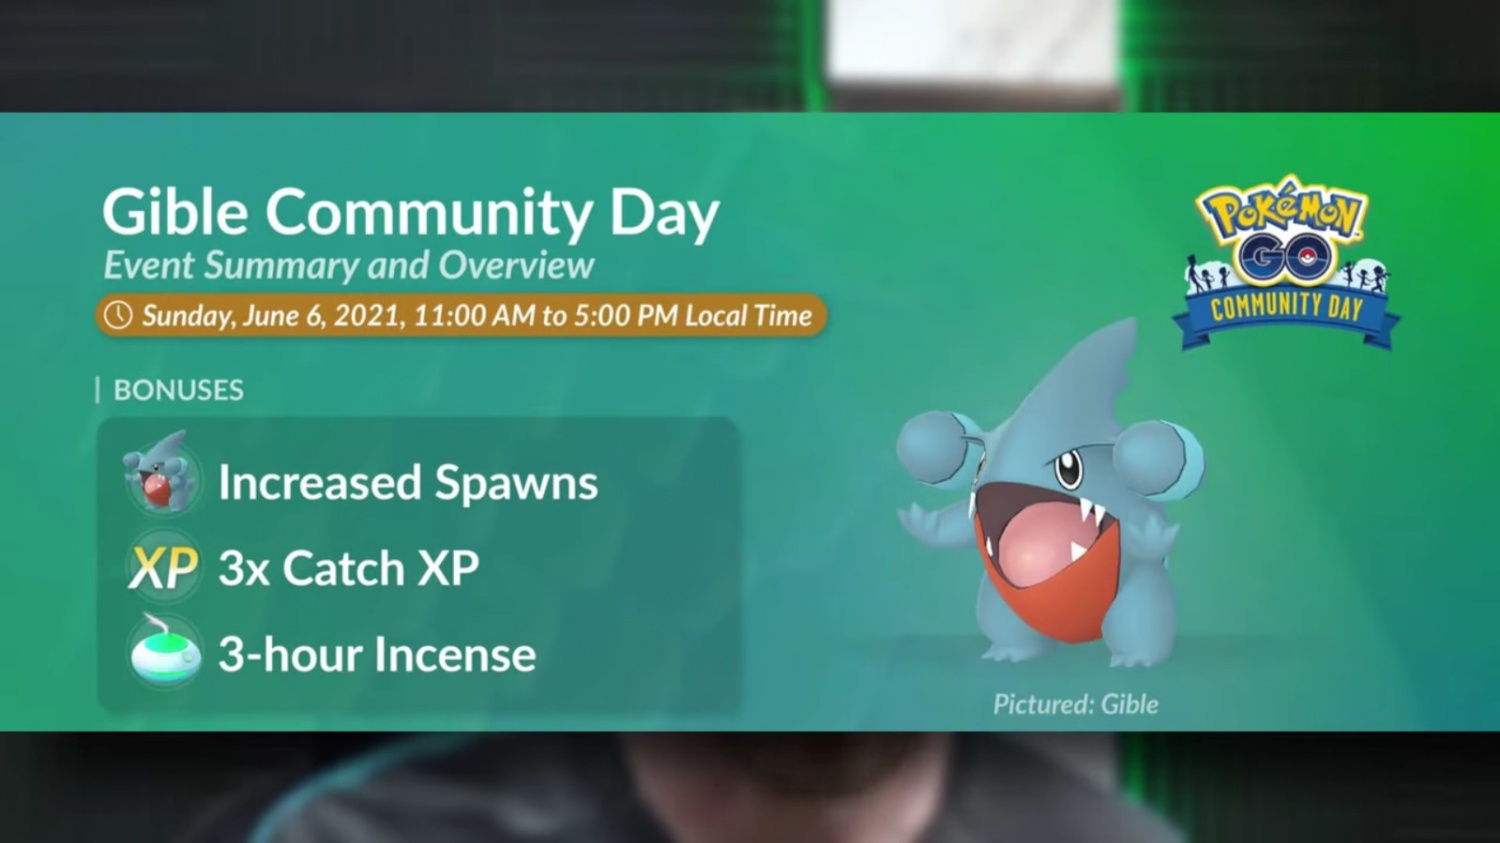 Pokemon Go Gible Community Day June 21 Guide How To Get Your Own Shiny Version Earth Power Exclusive Move Games Gamenguide